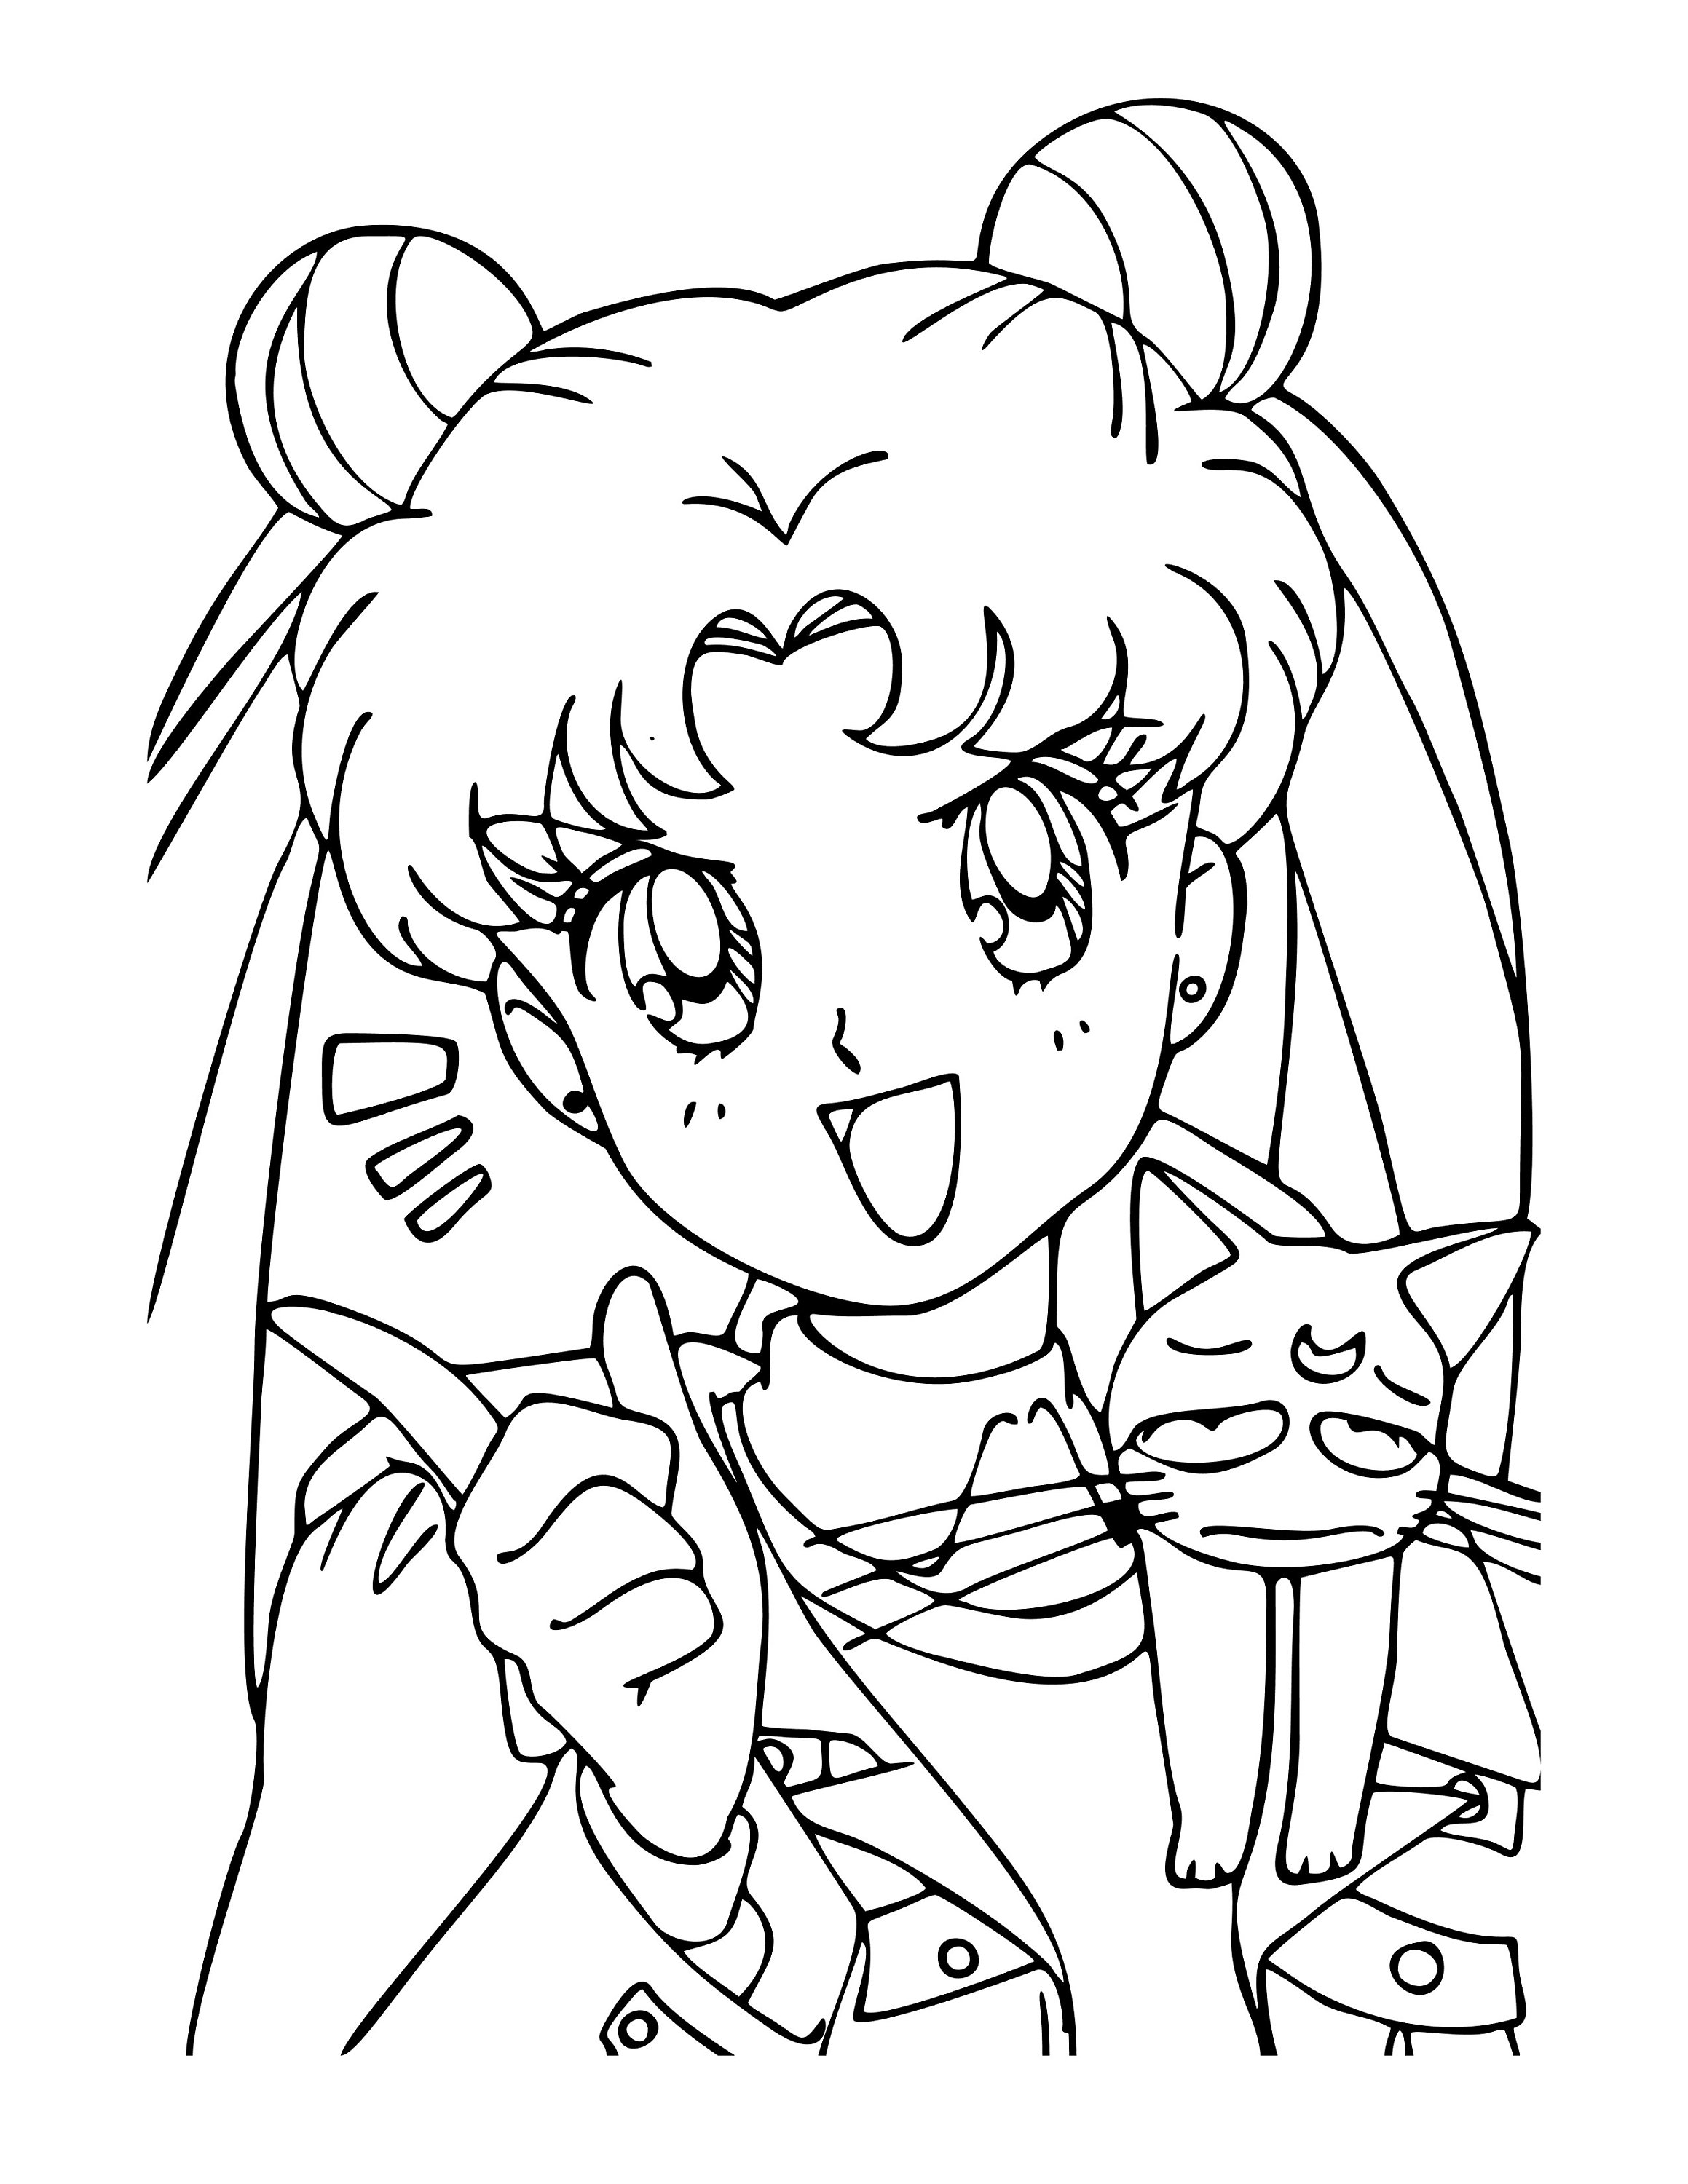 Sailor moon anime coloring pages fun for kids and all ages digital download color activity